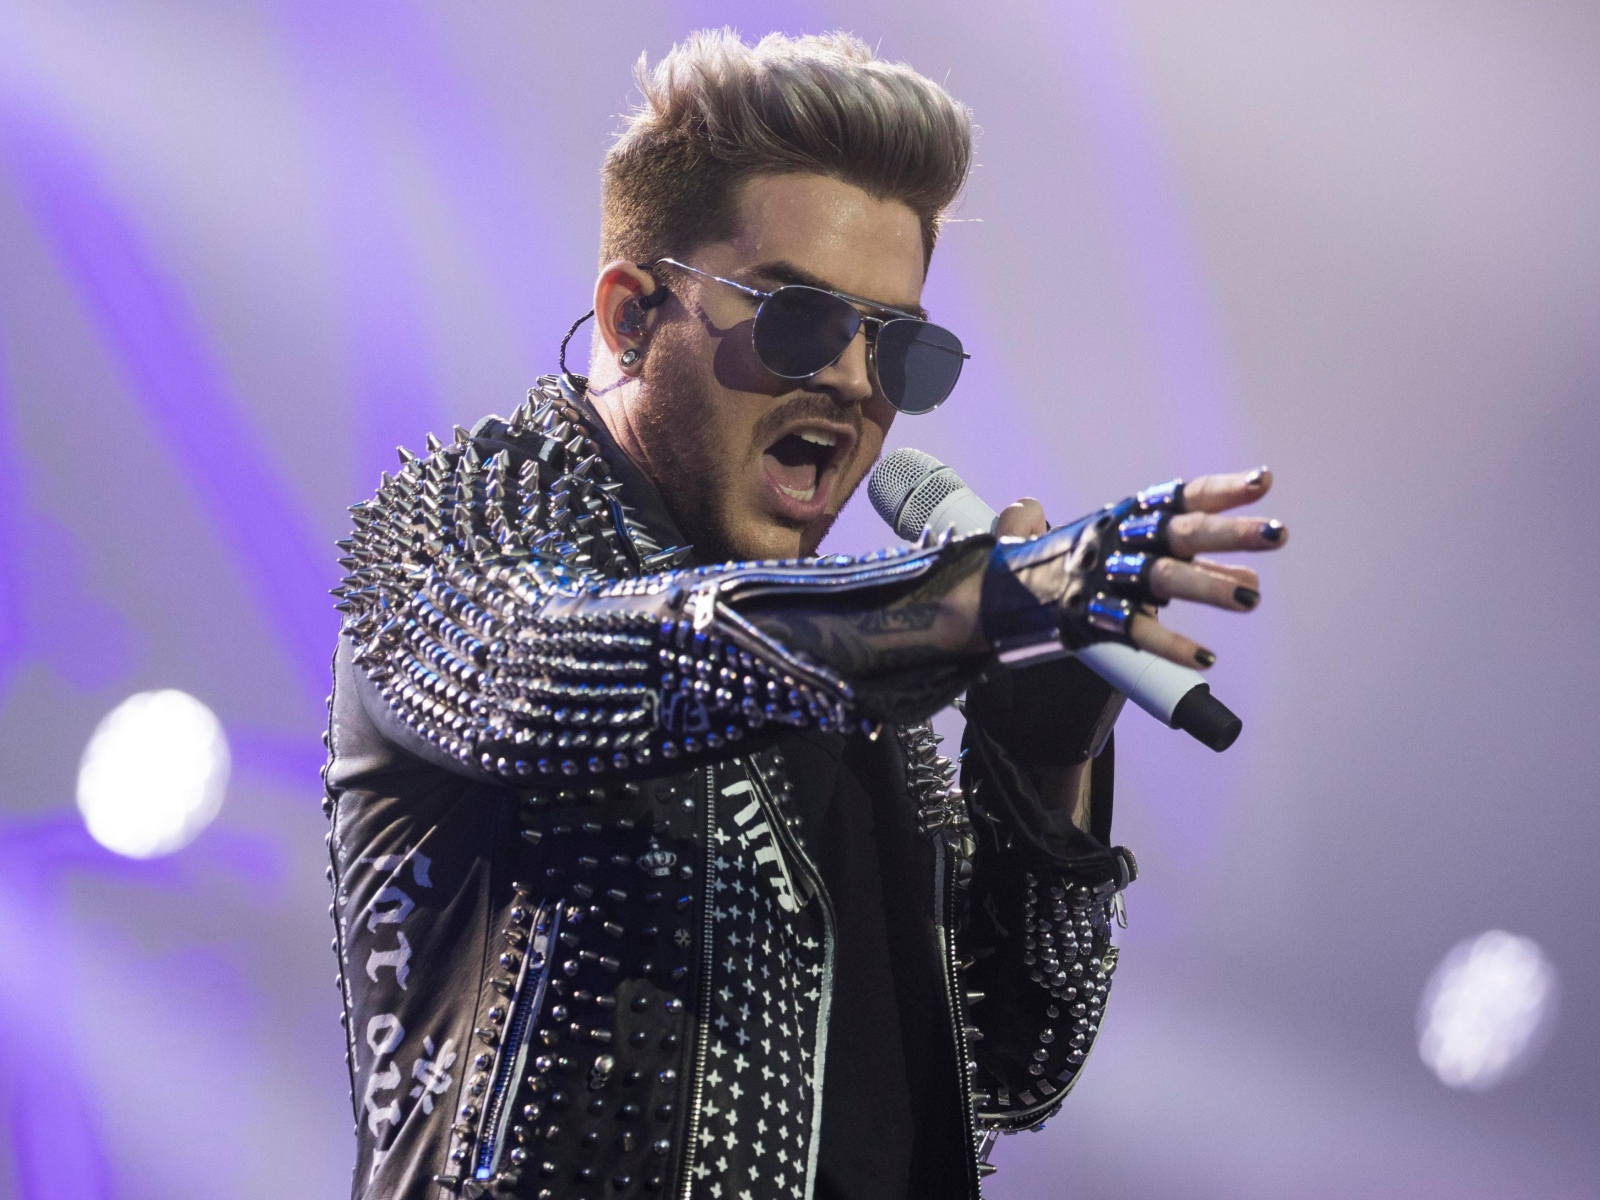 American singer Adam Lambert on stage with a microphone